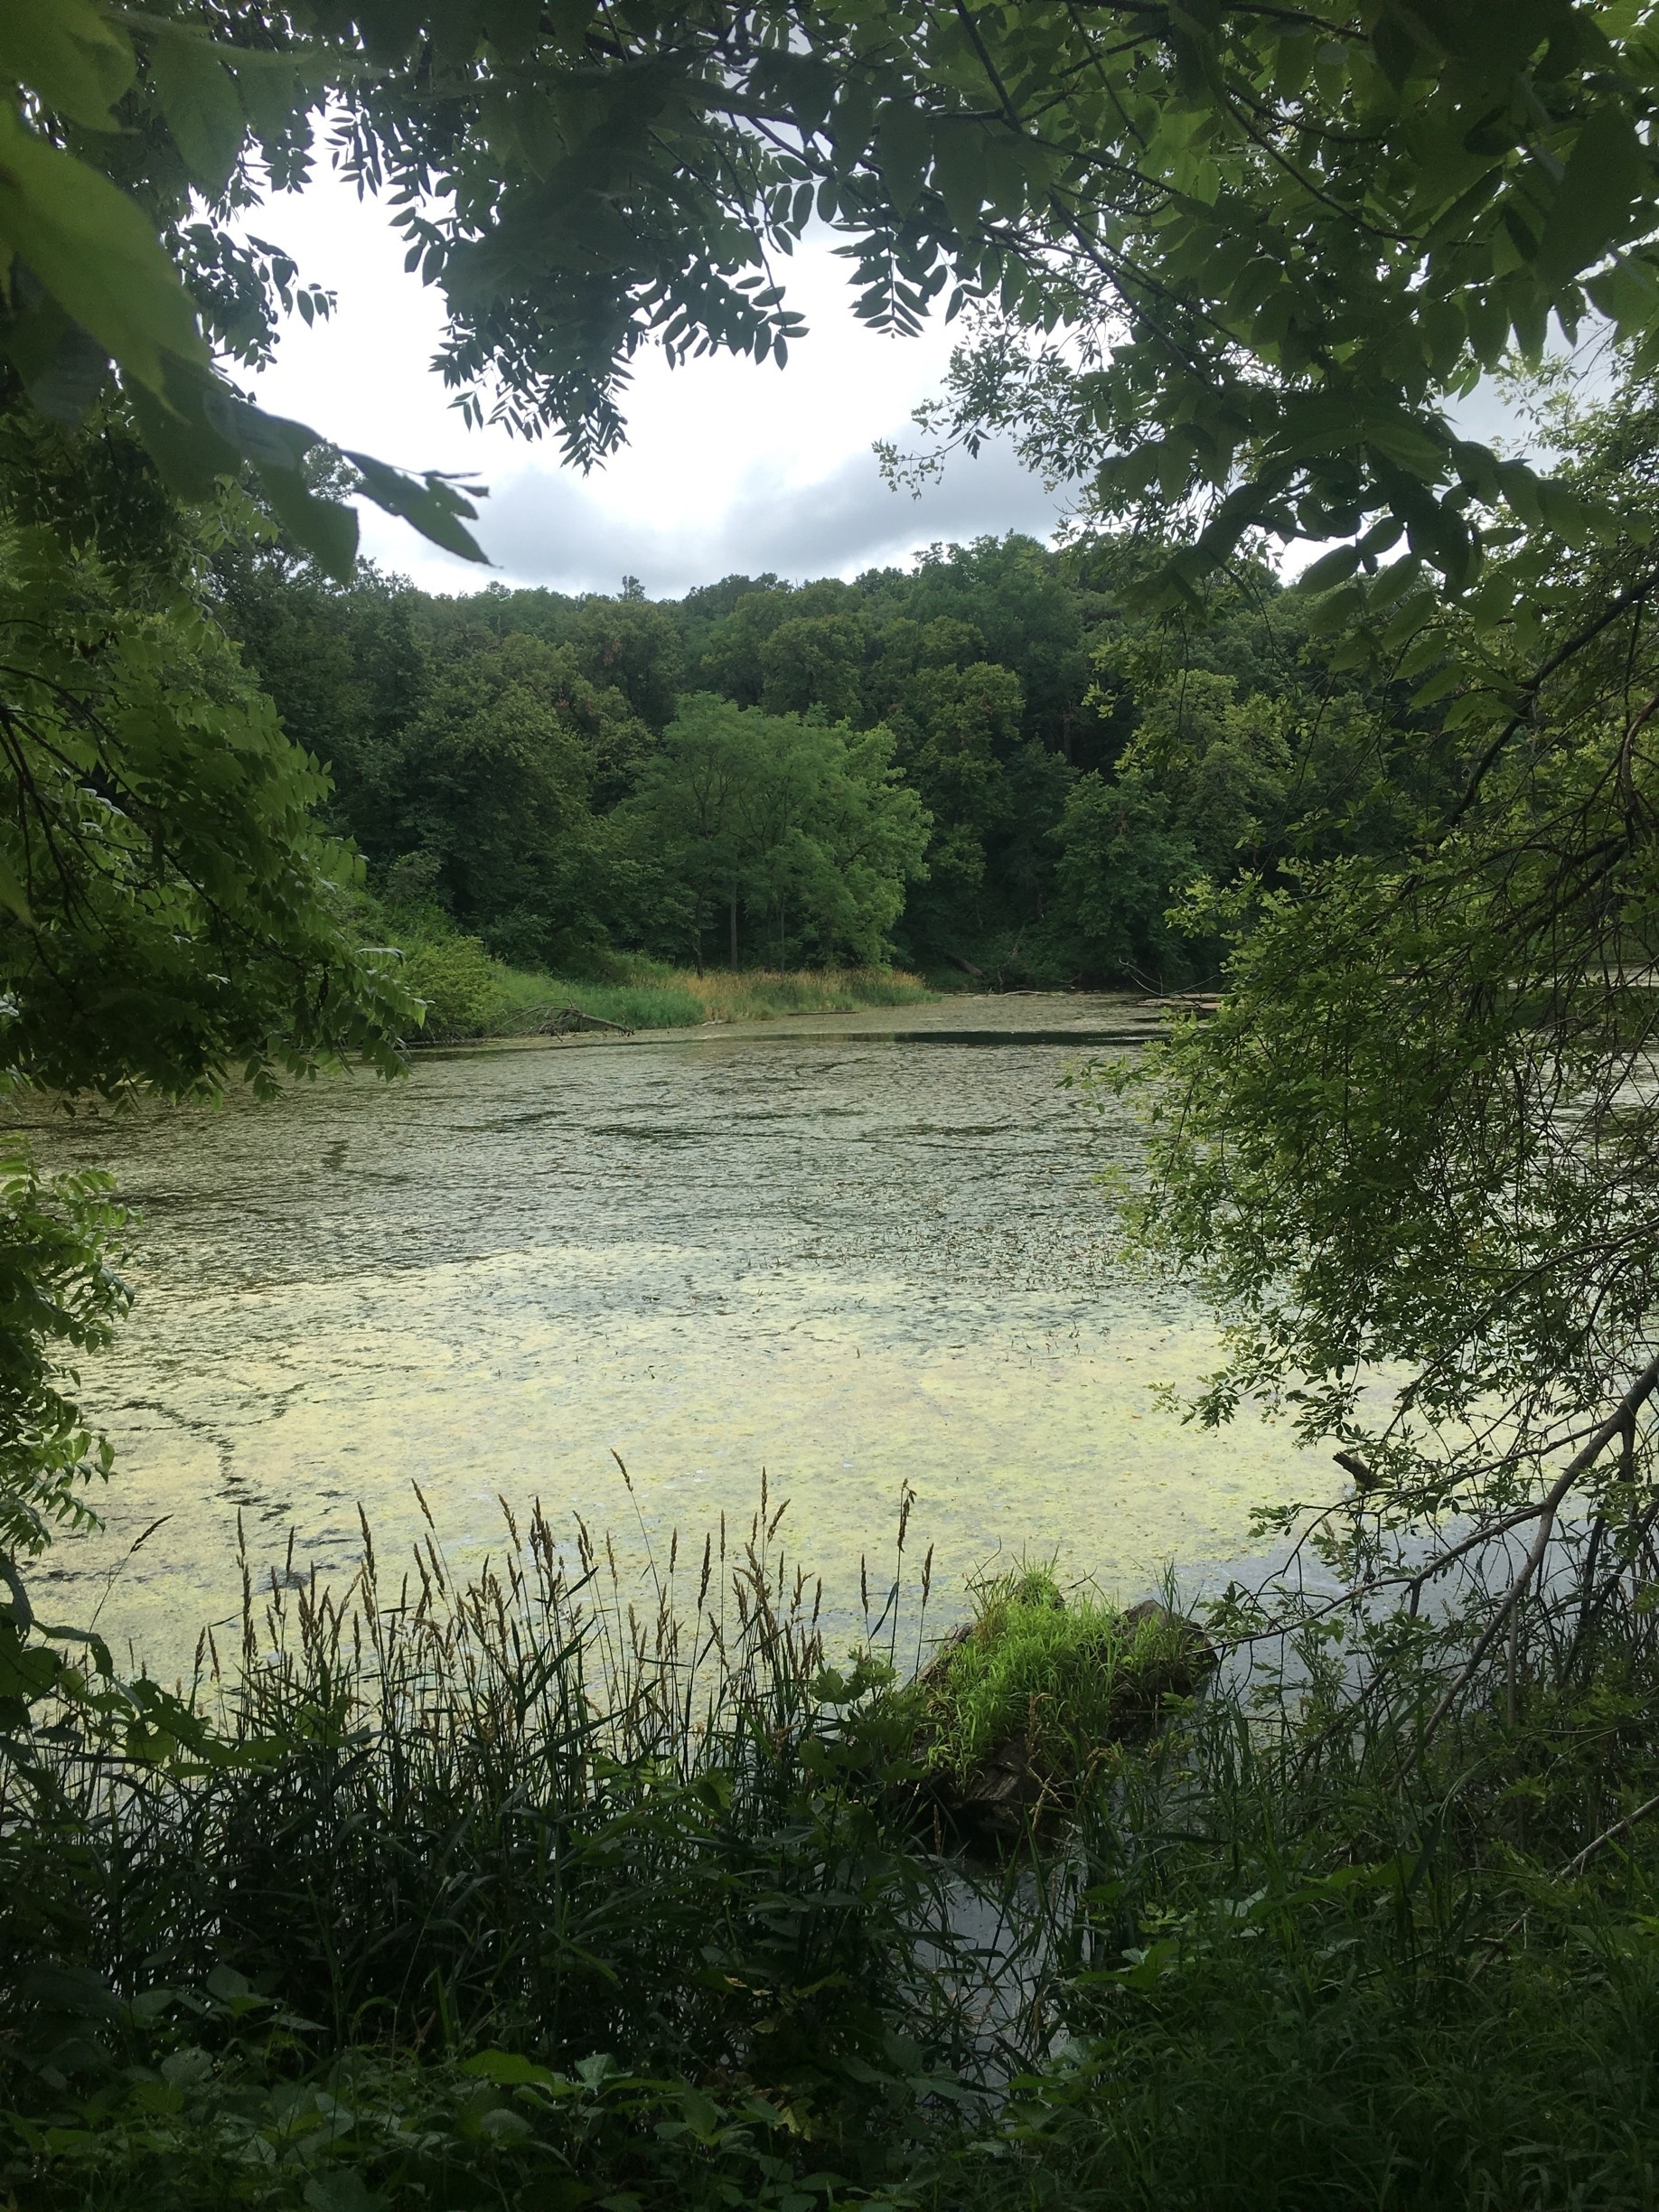 Easy hike to get to Turtle Lake in Stone State Park #hiking